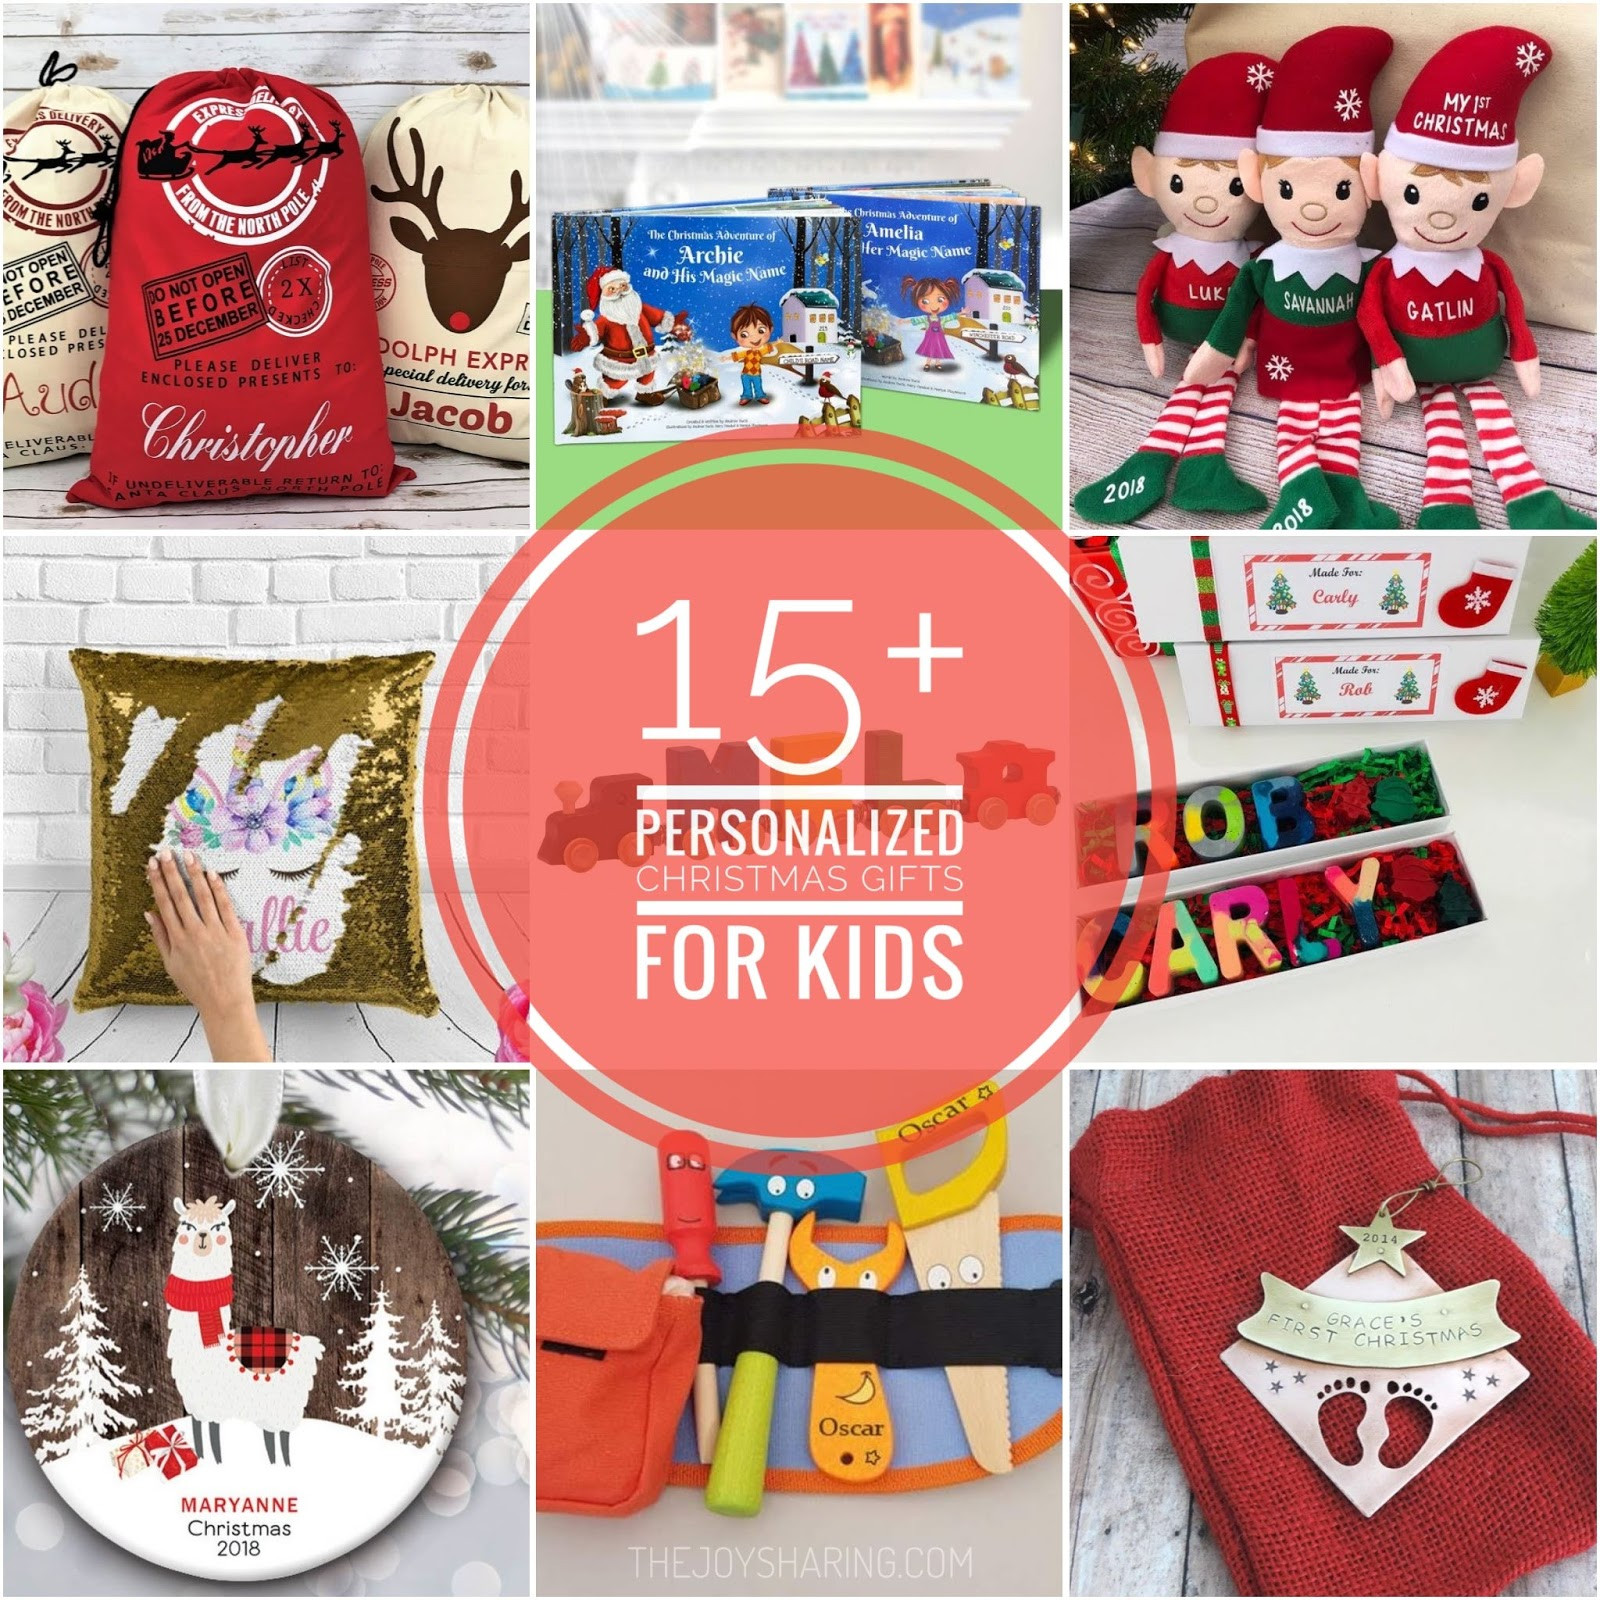 Personalized Christmas Gifts For Kids
 15 Personalized Christmas Gifts for Kids The Joy of Sharing